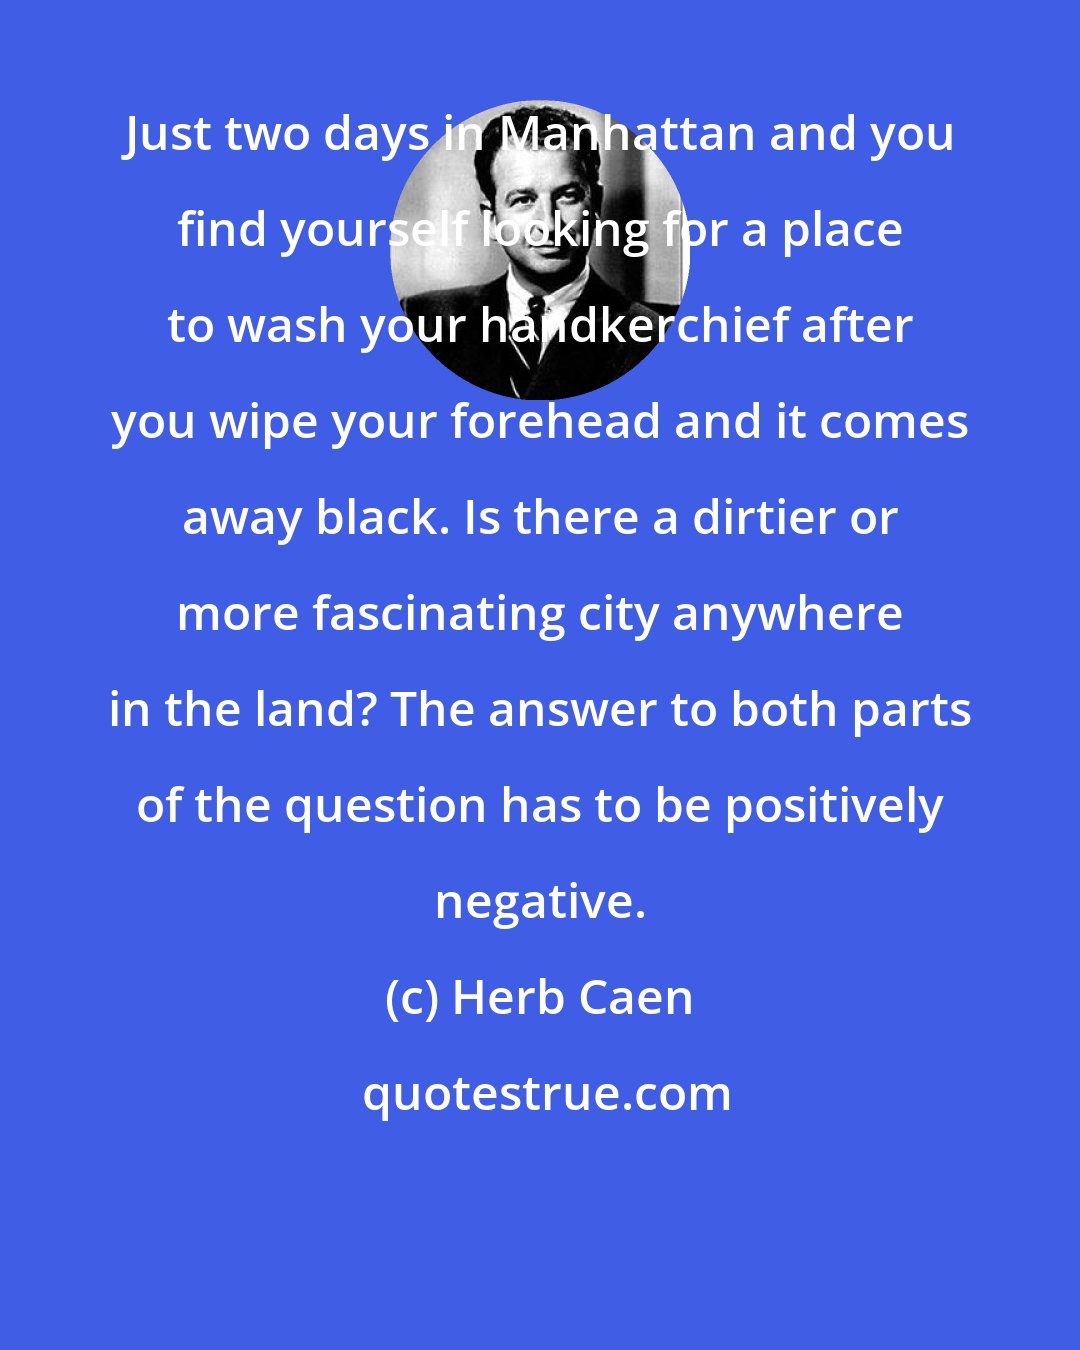 Herb Caen: Just two days in Manhattan and you find yourself looking for a place to wash your handkerchief after you wipe your forehead and it comes away black. Is there a dirtier or more fascinating city anywhere in the land? The answer to both parts of the question has to be positively negative.